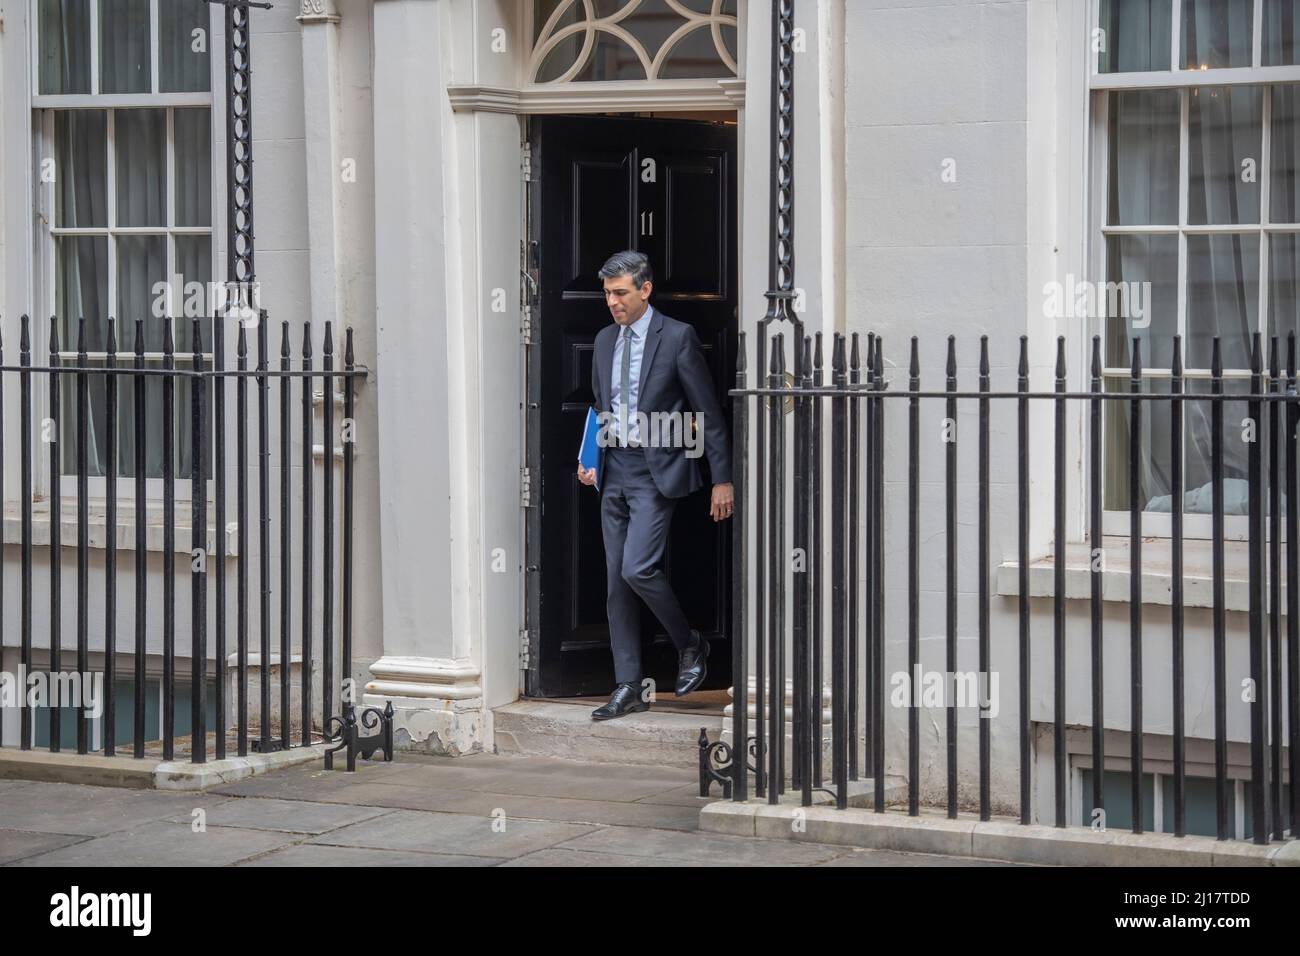 11 Downing Street, London, UK. 23 March 2022. Rishi Sunak MP, Chancellor of the Exchequer, leaving 11 Downing Street before giving his Spring Statement to Parliament. Credit: Malcolm Park/Alamy Live News. Stock Photo